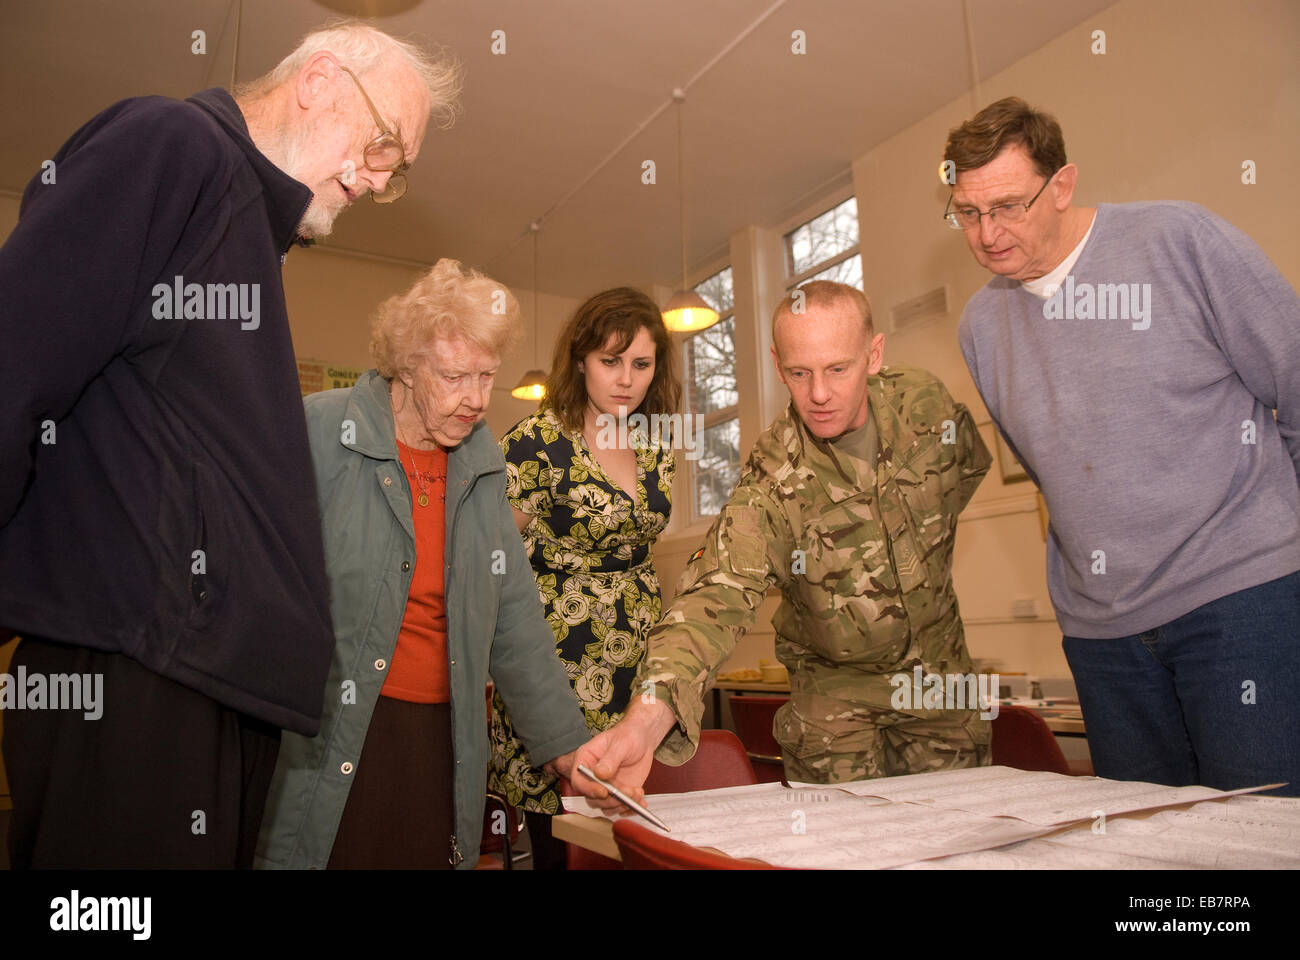 People perusing old maps at a heritage open day at local arts centre, Bordon, Hampshire, UK. Stock Photo